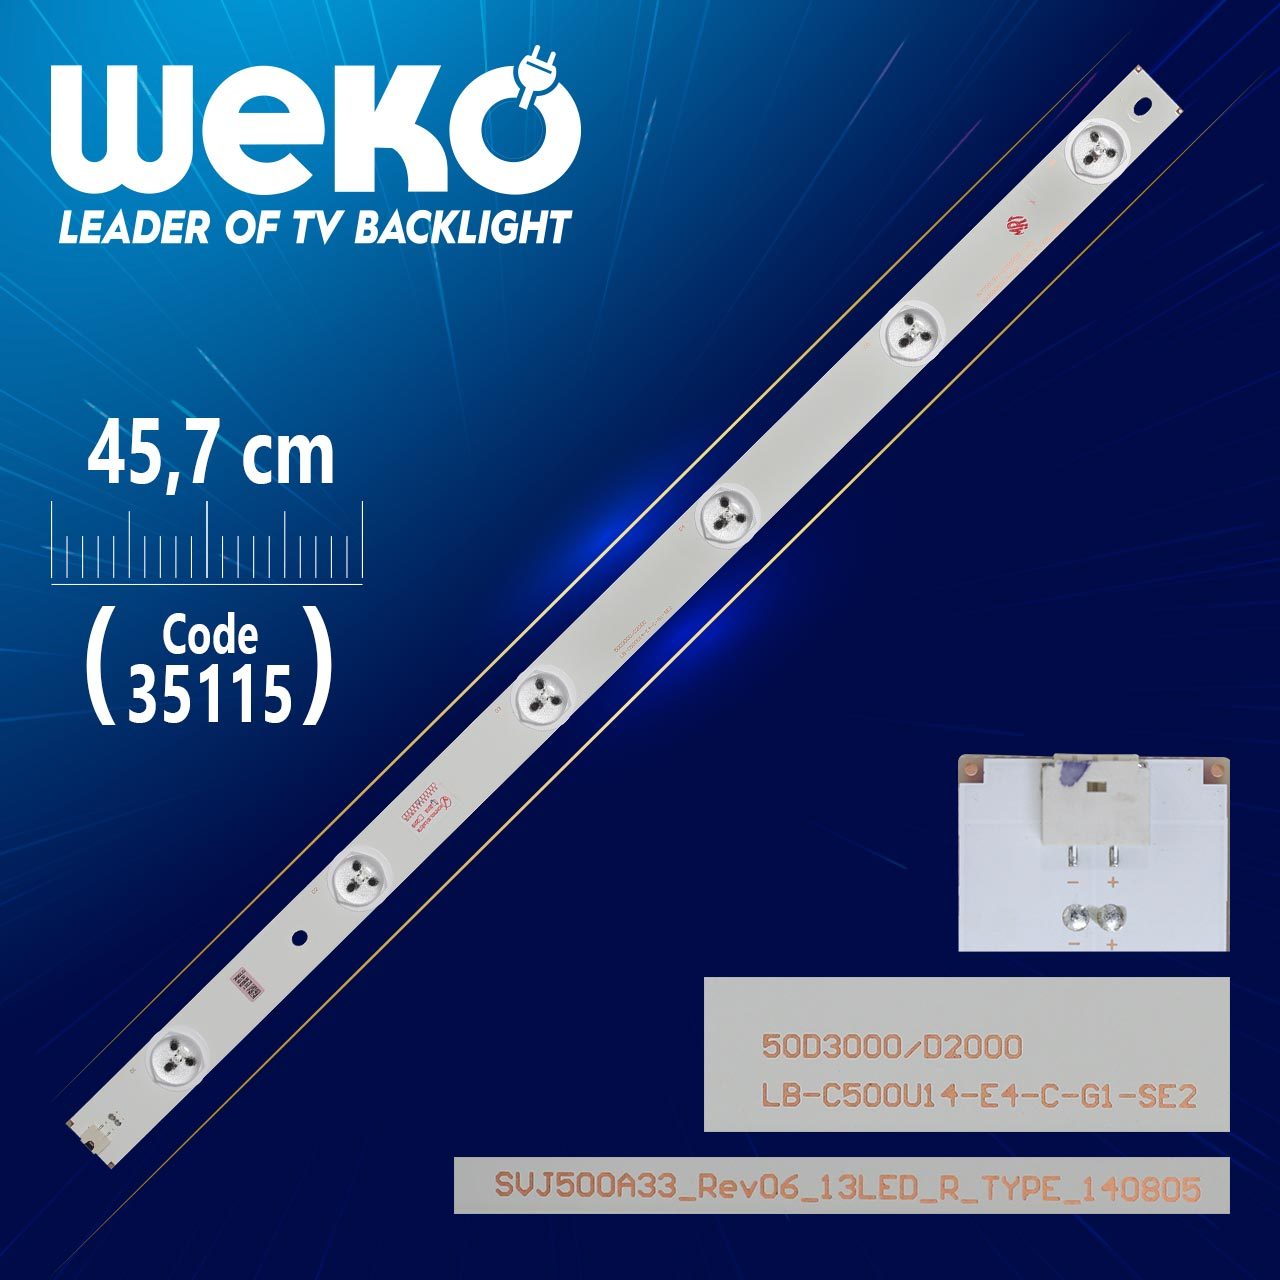 CLZ192 SVJ500A33_REV06_13LED_R_TYPE - LB-C500U14-E4-C-G1-SE2 - 45.7 CM 6 LEDLİ - (WK-855) (4172)